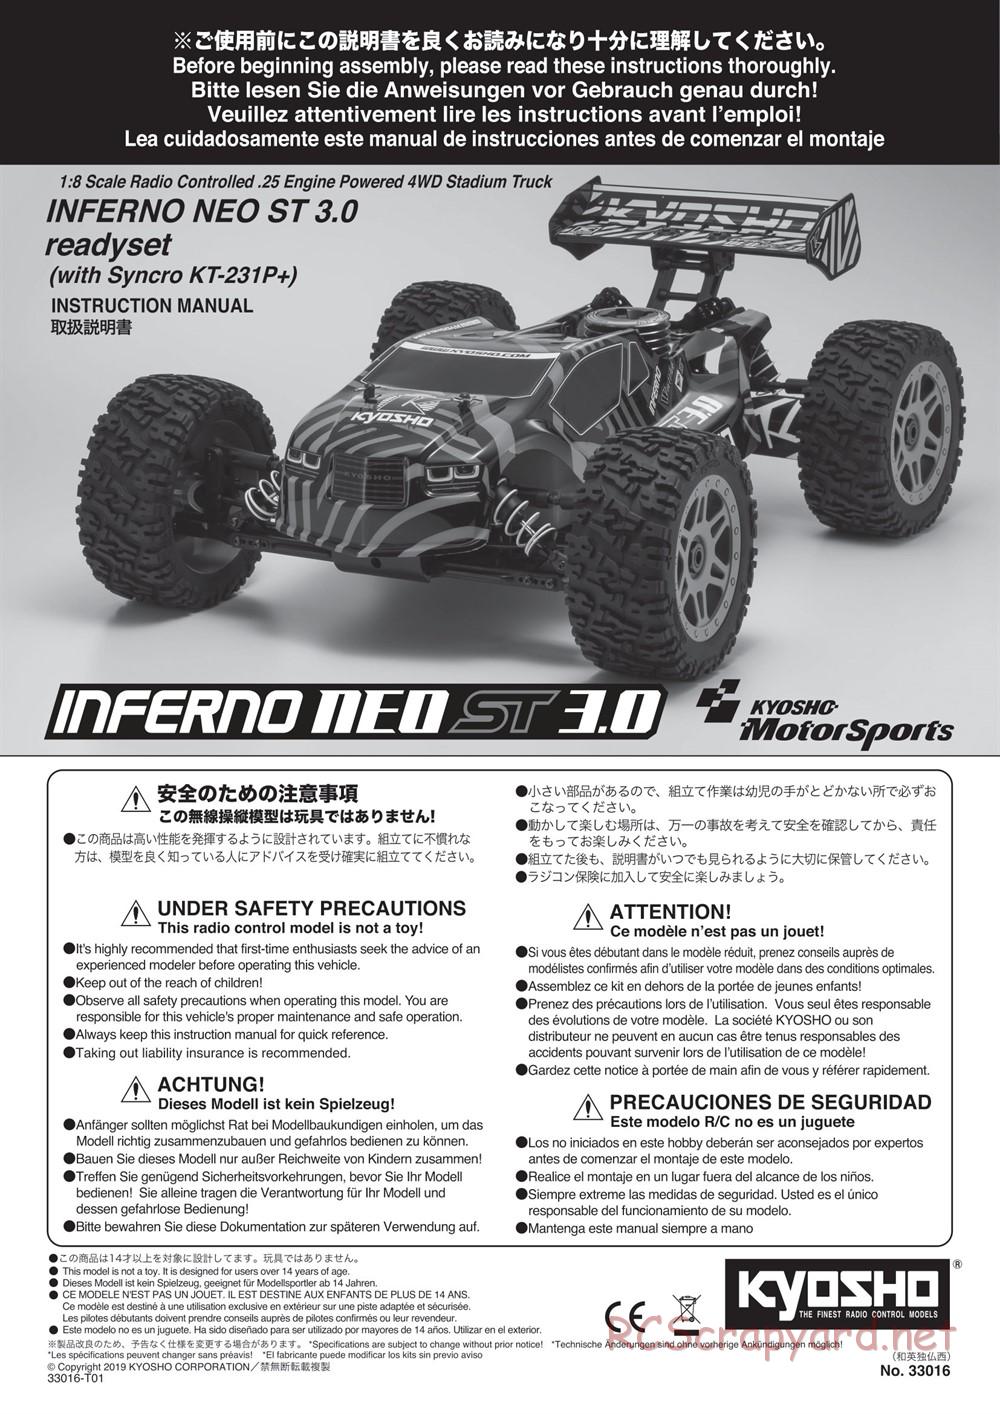 Kyosho - Inferno Neo ST 3.0 - Manual - Page 1